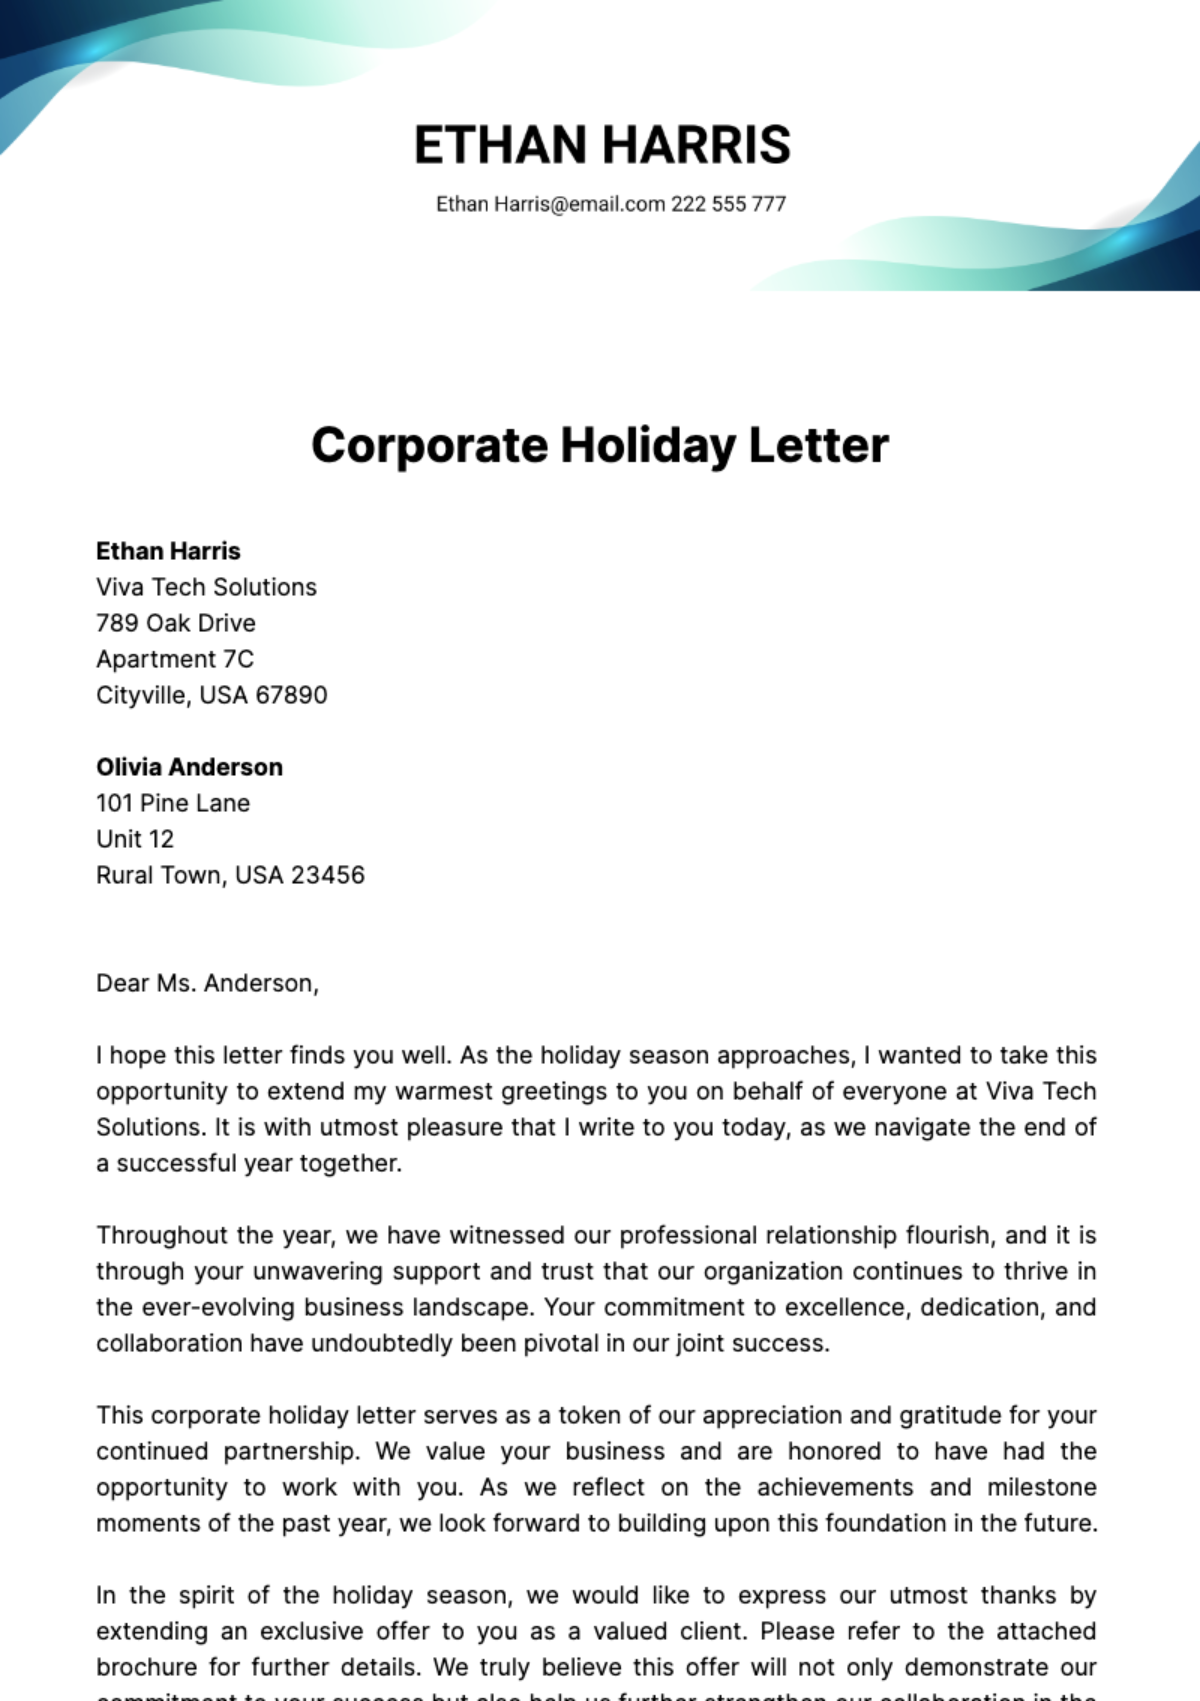 Corporate Holiday Letter Template